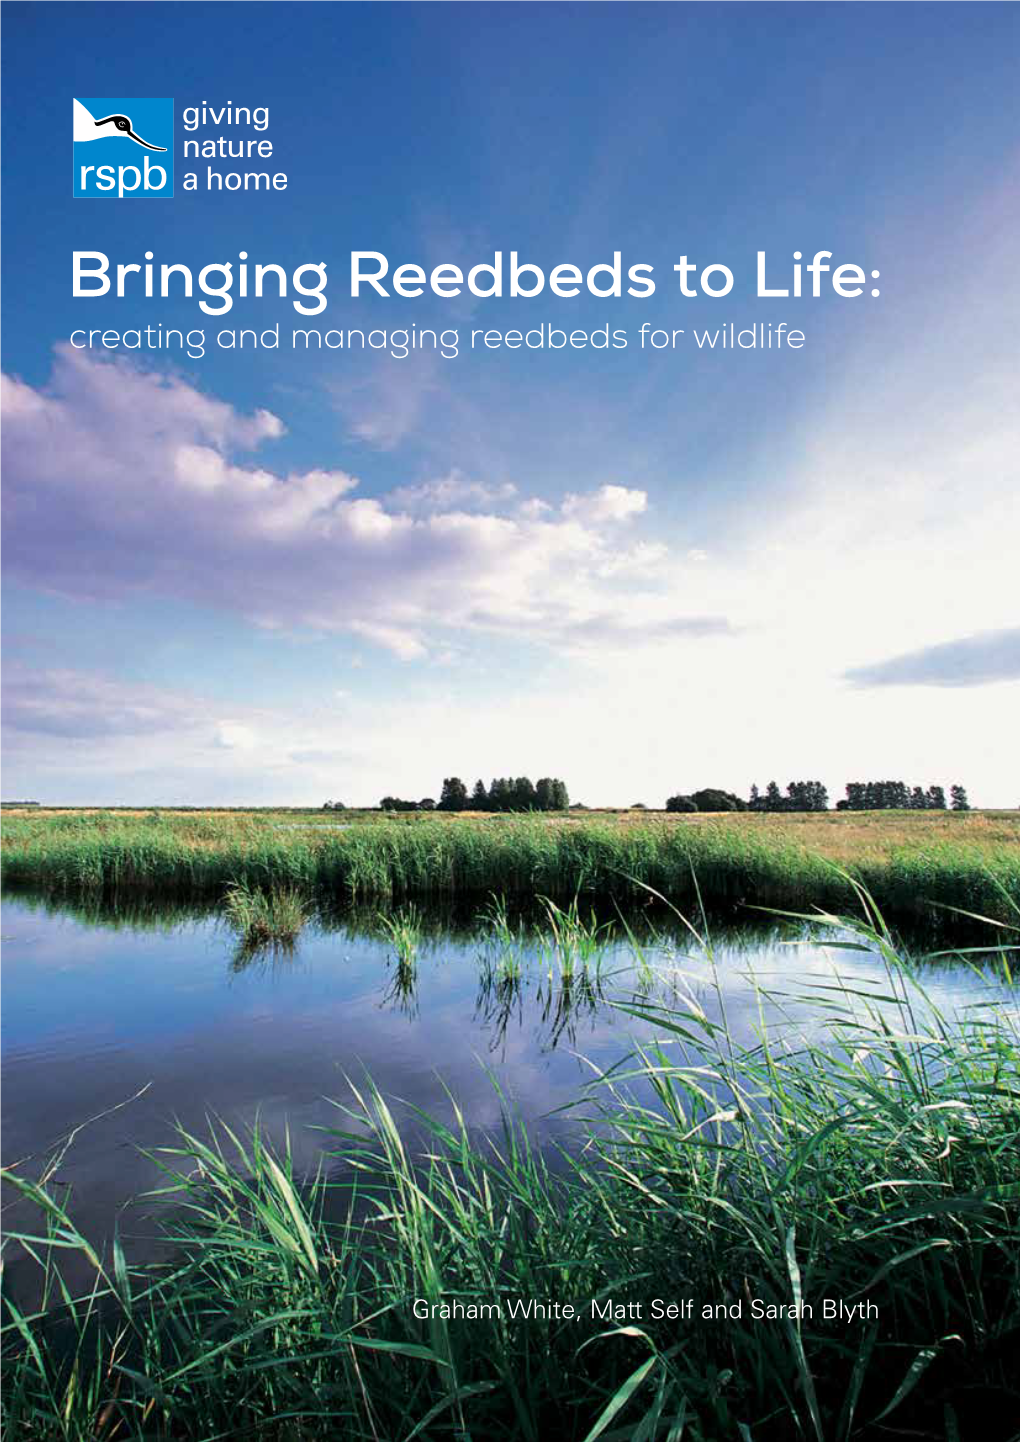 Bringing Reedbeds to Life: Creating and Managing Reedbeds for Wildlife